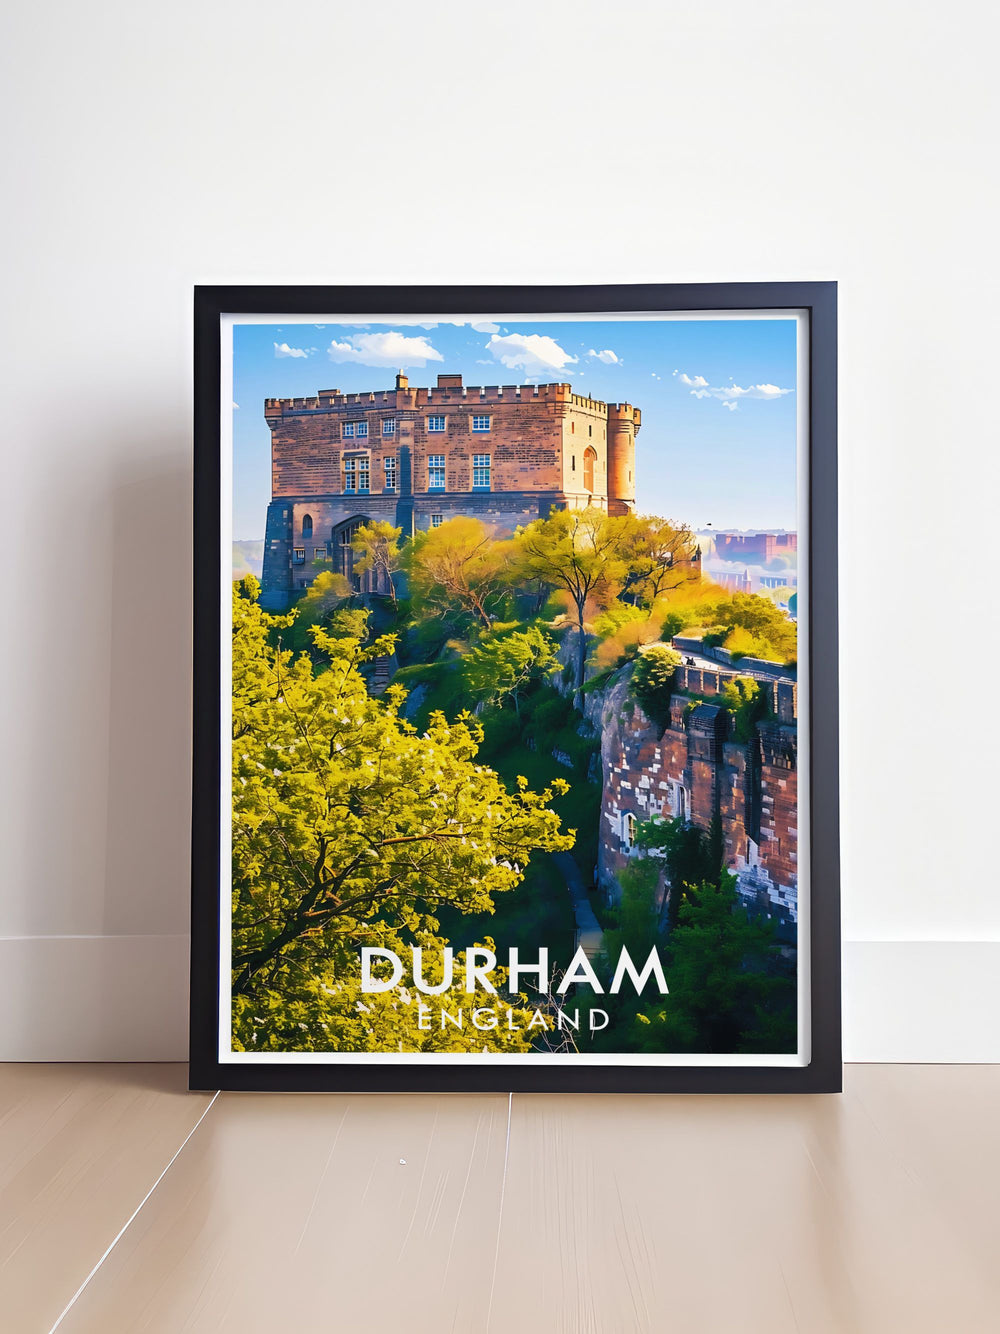 The serene River Wear and the imposing Durham Castle are beautifully illustrated in this poster, highlighting the citys rich history and natural beauty, perfect for your home decor.